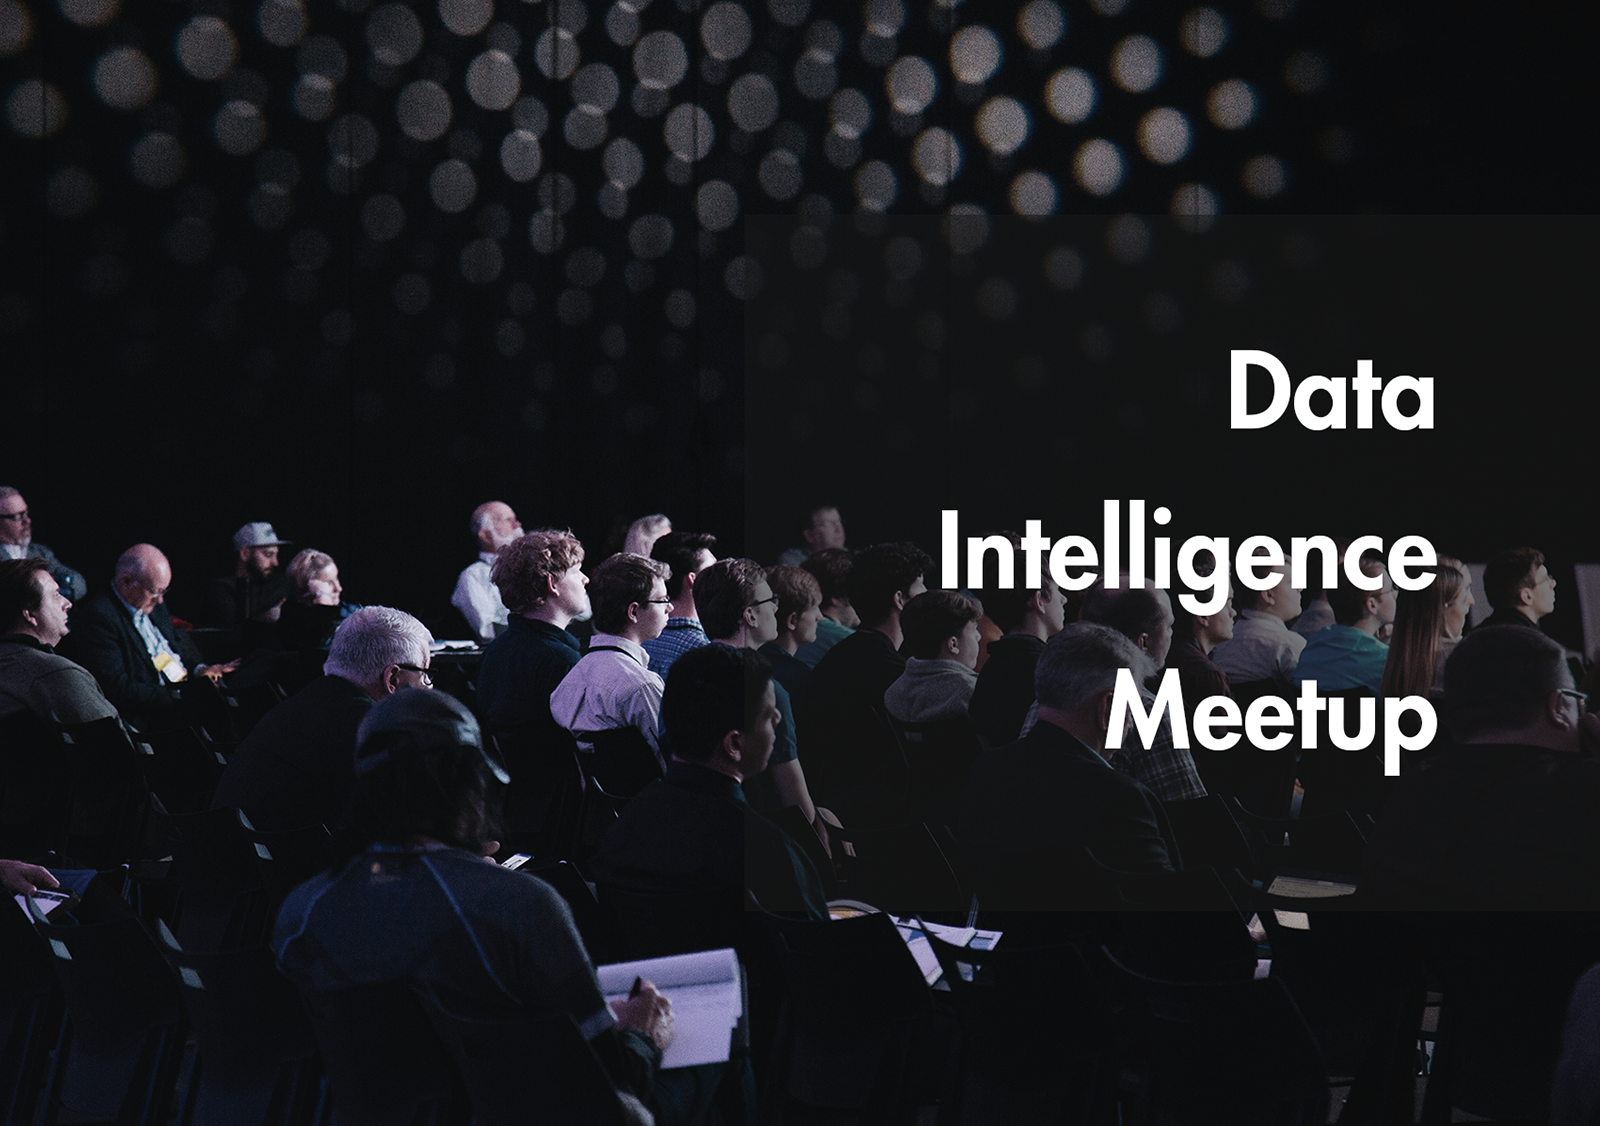 Data Intelligence Meetup: An event dedicated to strengthening the AI and data science community in Munich